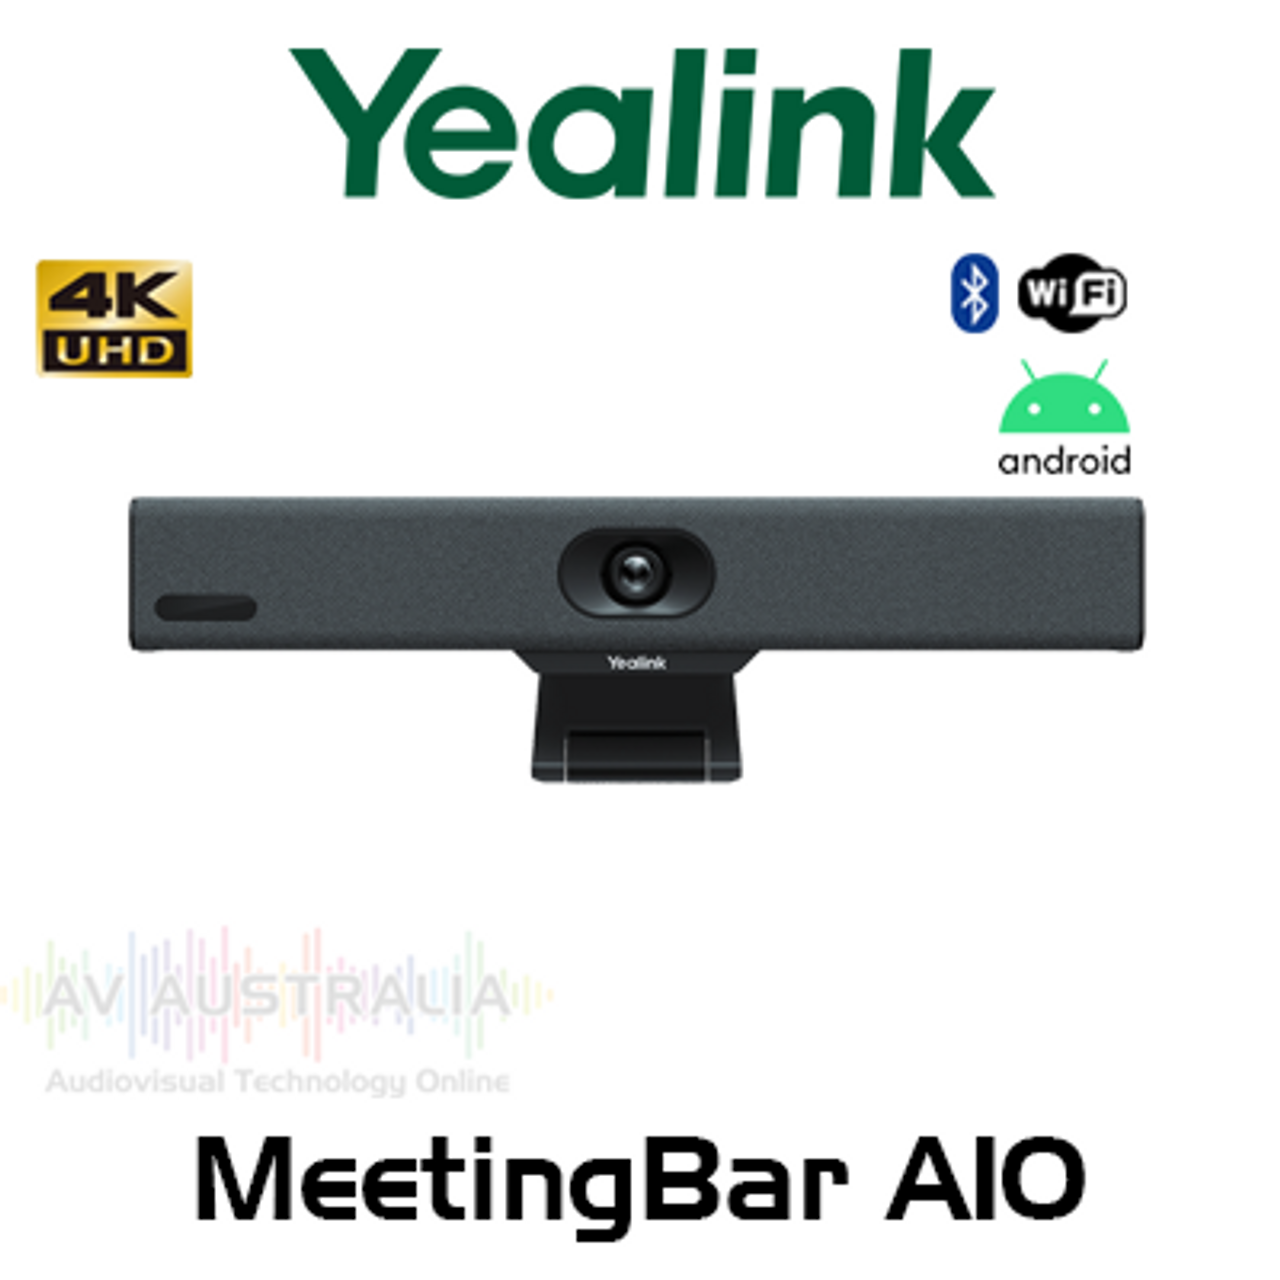 Yealink MeetingBar A10 4K UHD All-In-One Android Video Bar with VCR11 Remote